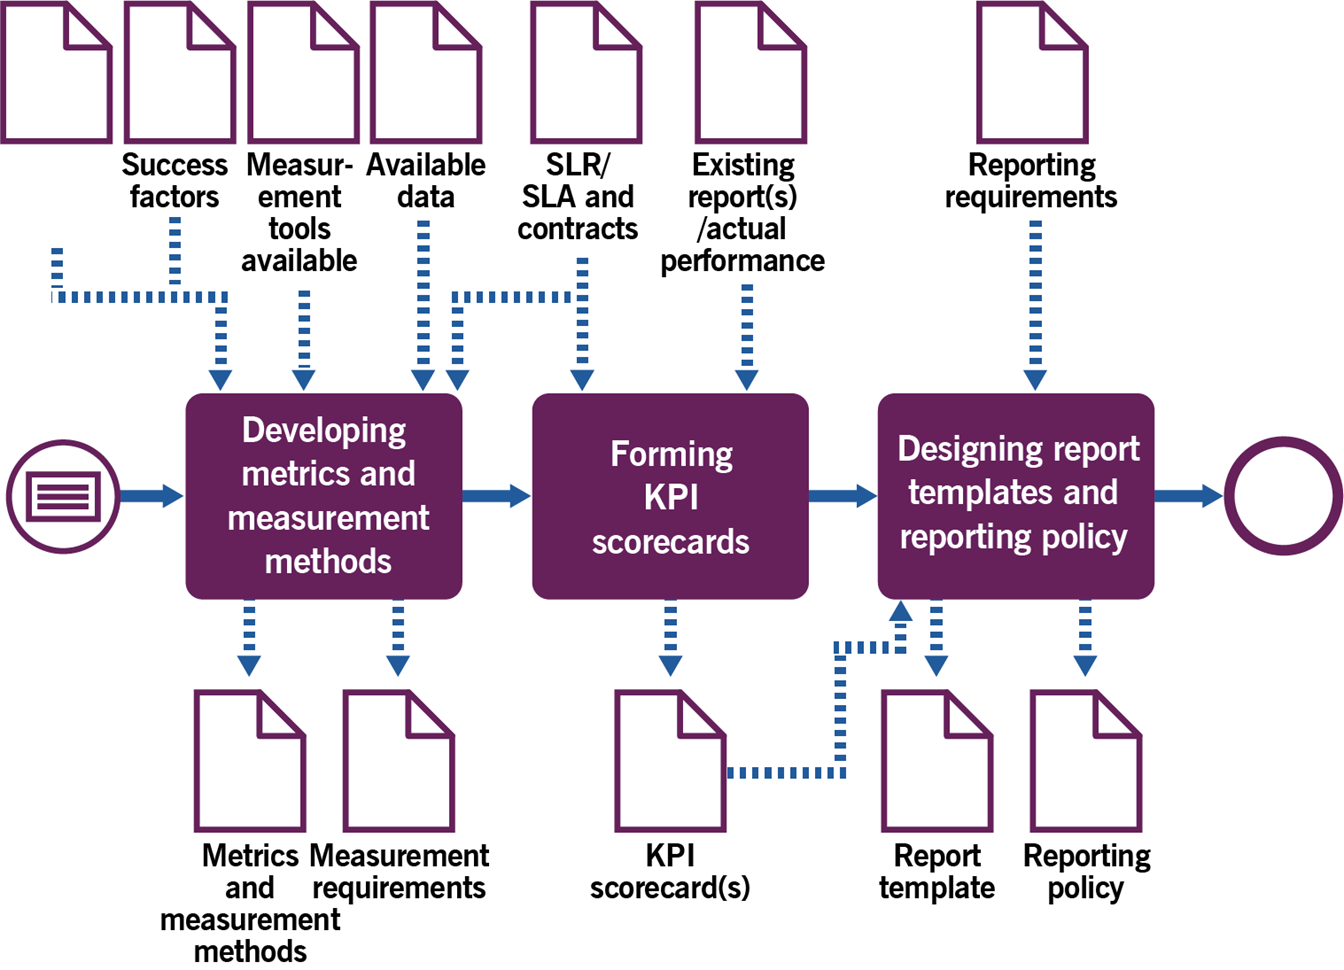 Image of Figure 3.2 show a workflow diagram of the Measurement and Reporting systems process